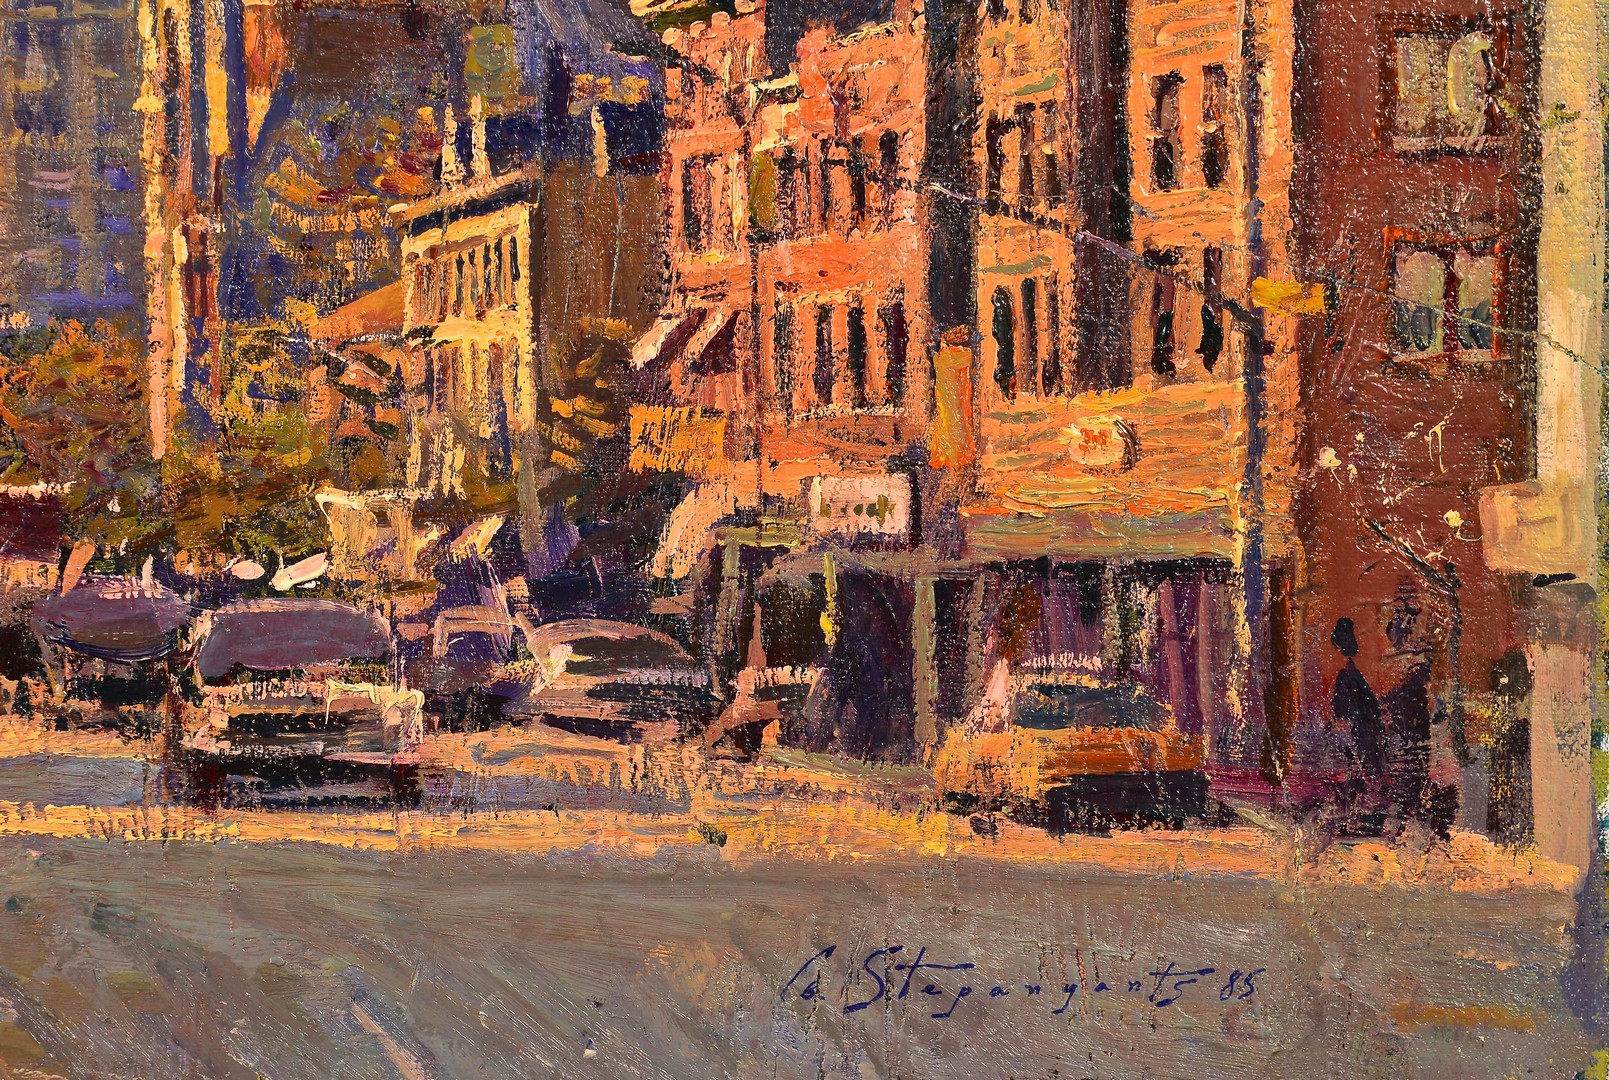 Lot 455: Grigory Stepanyants, NYC 6th Ave.